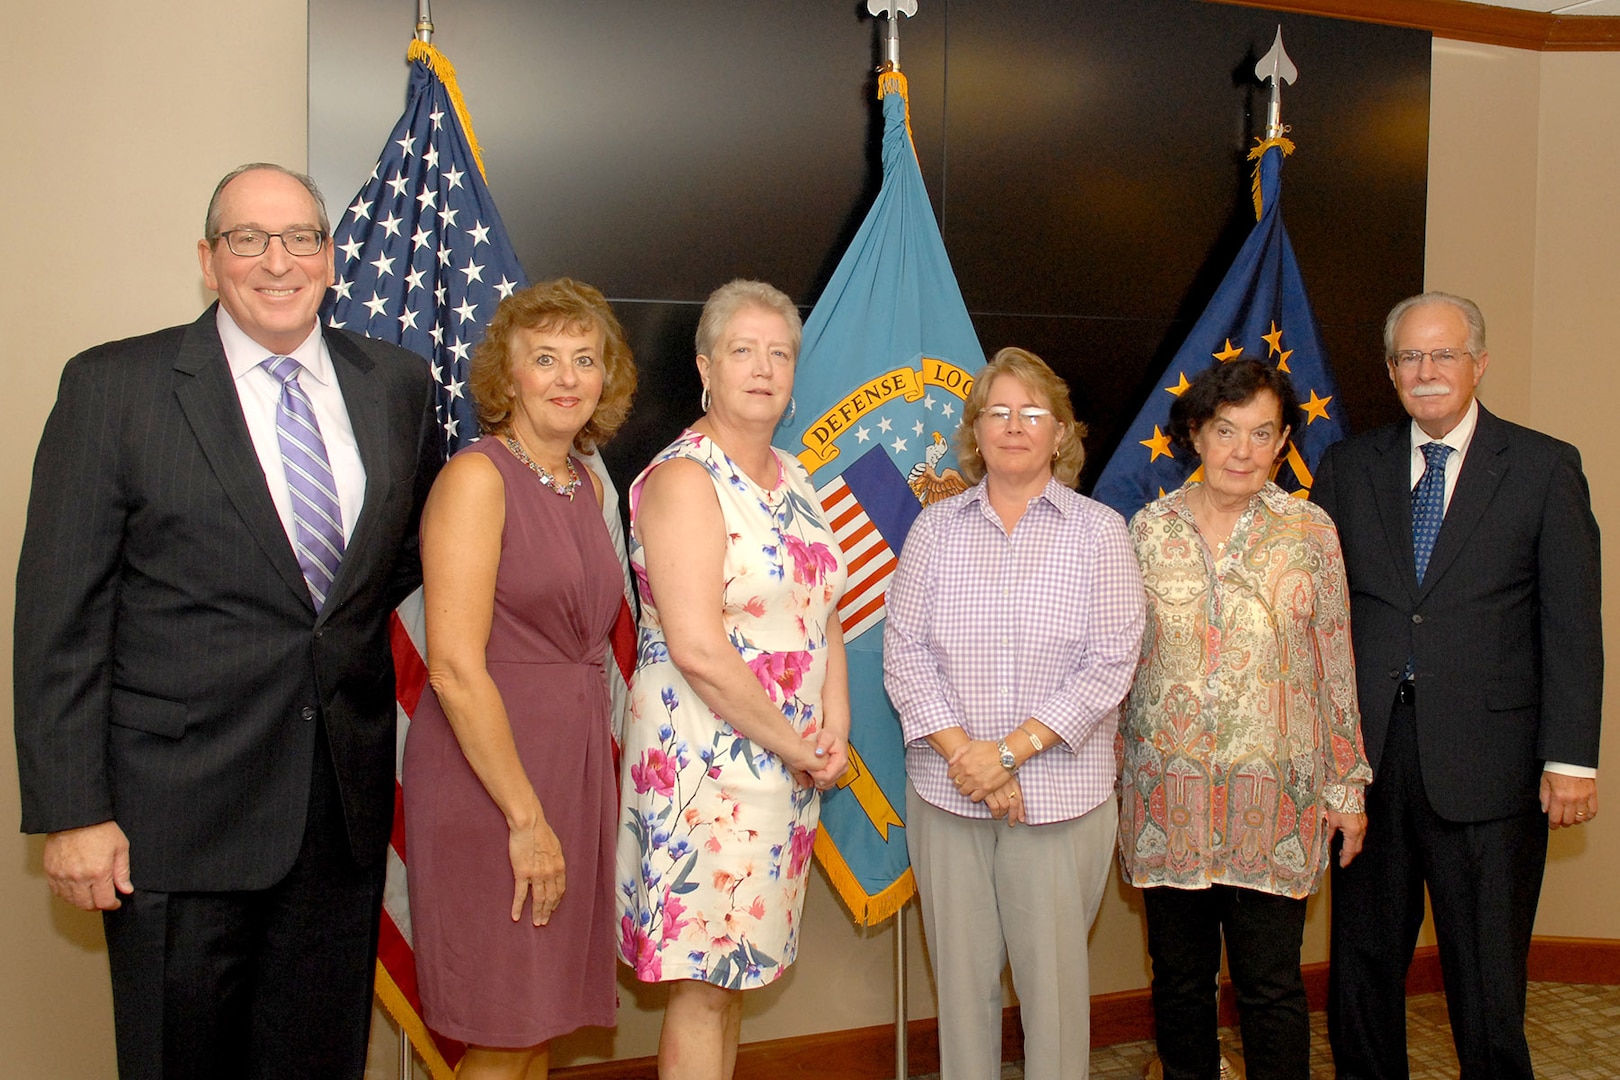 Troop Support celebrates 209 years of service during retirement ceremony